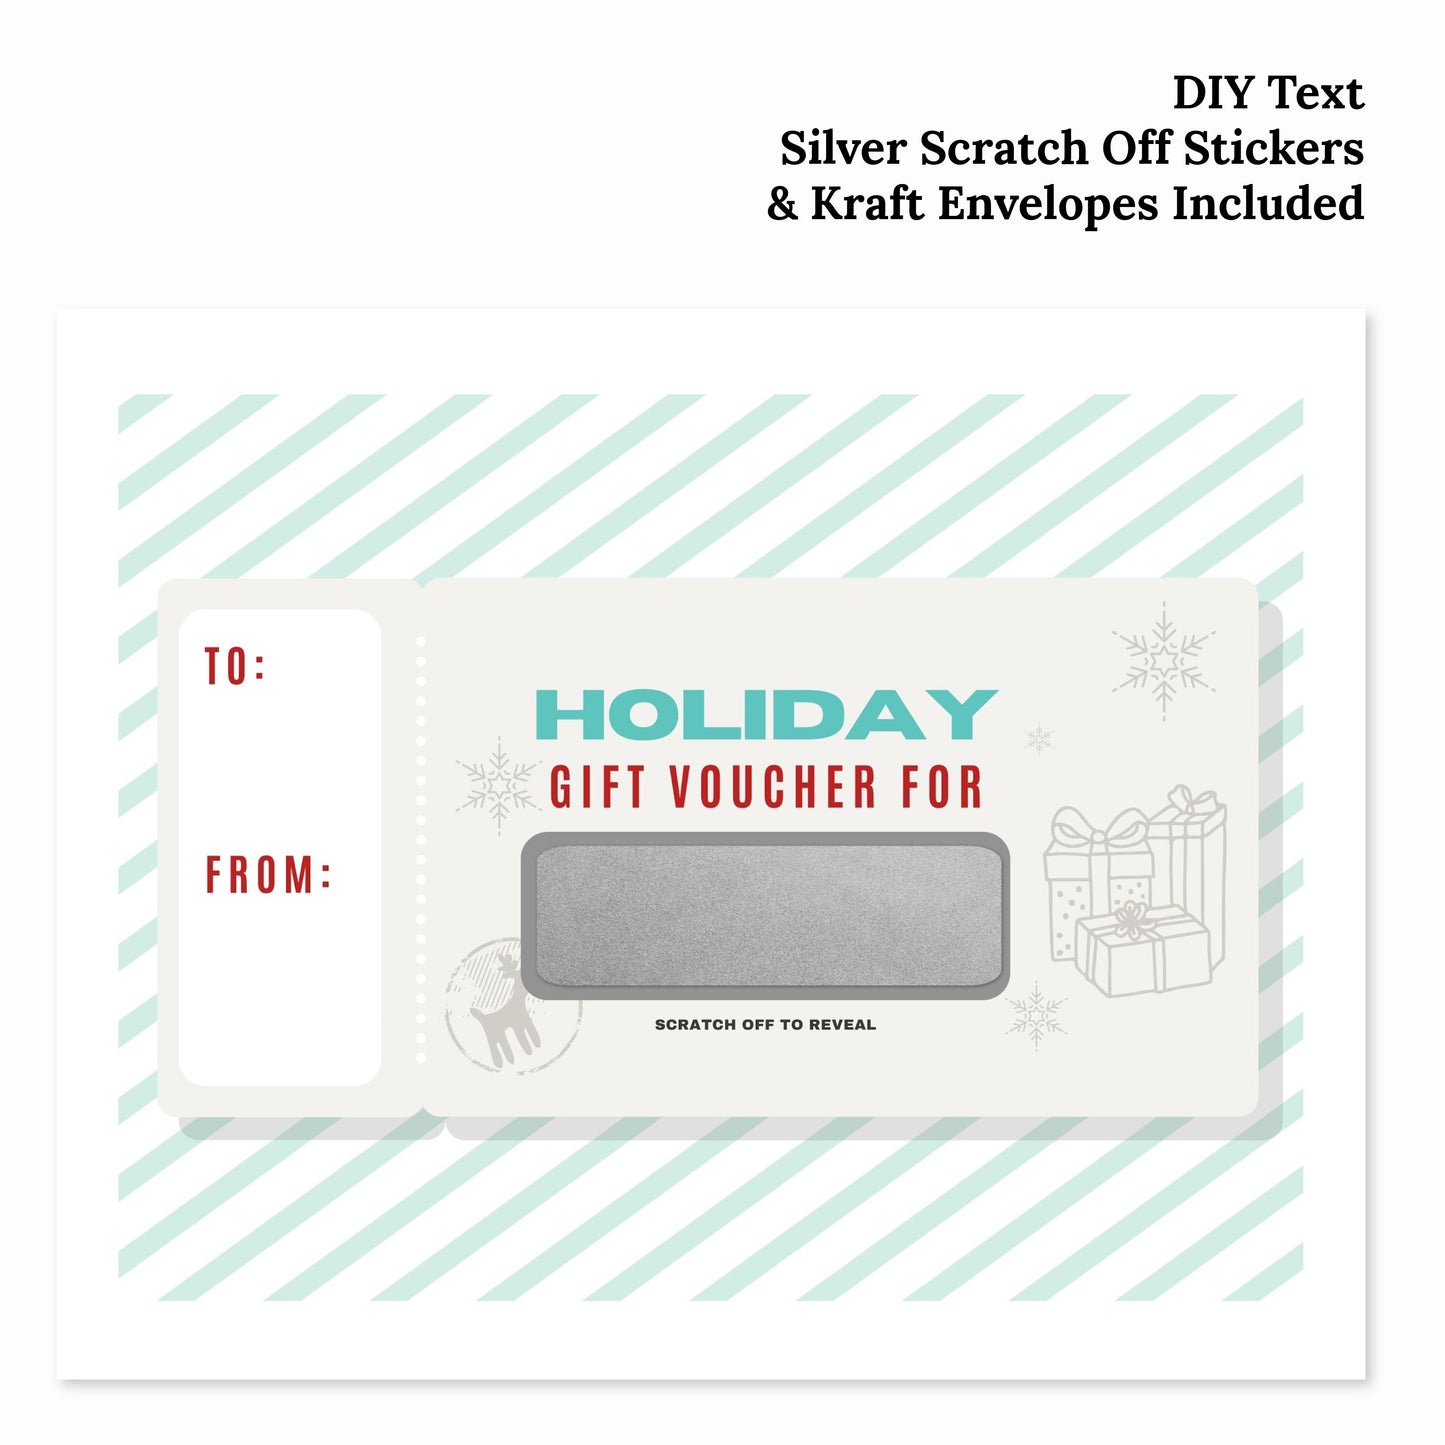 3 PK DIY Custom Text Scratch Off Christmas Or Holiday Gift Phrase Voucher Card | Personalized Gift Surprise Card